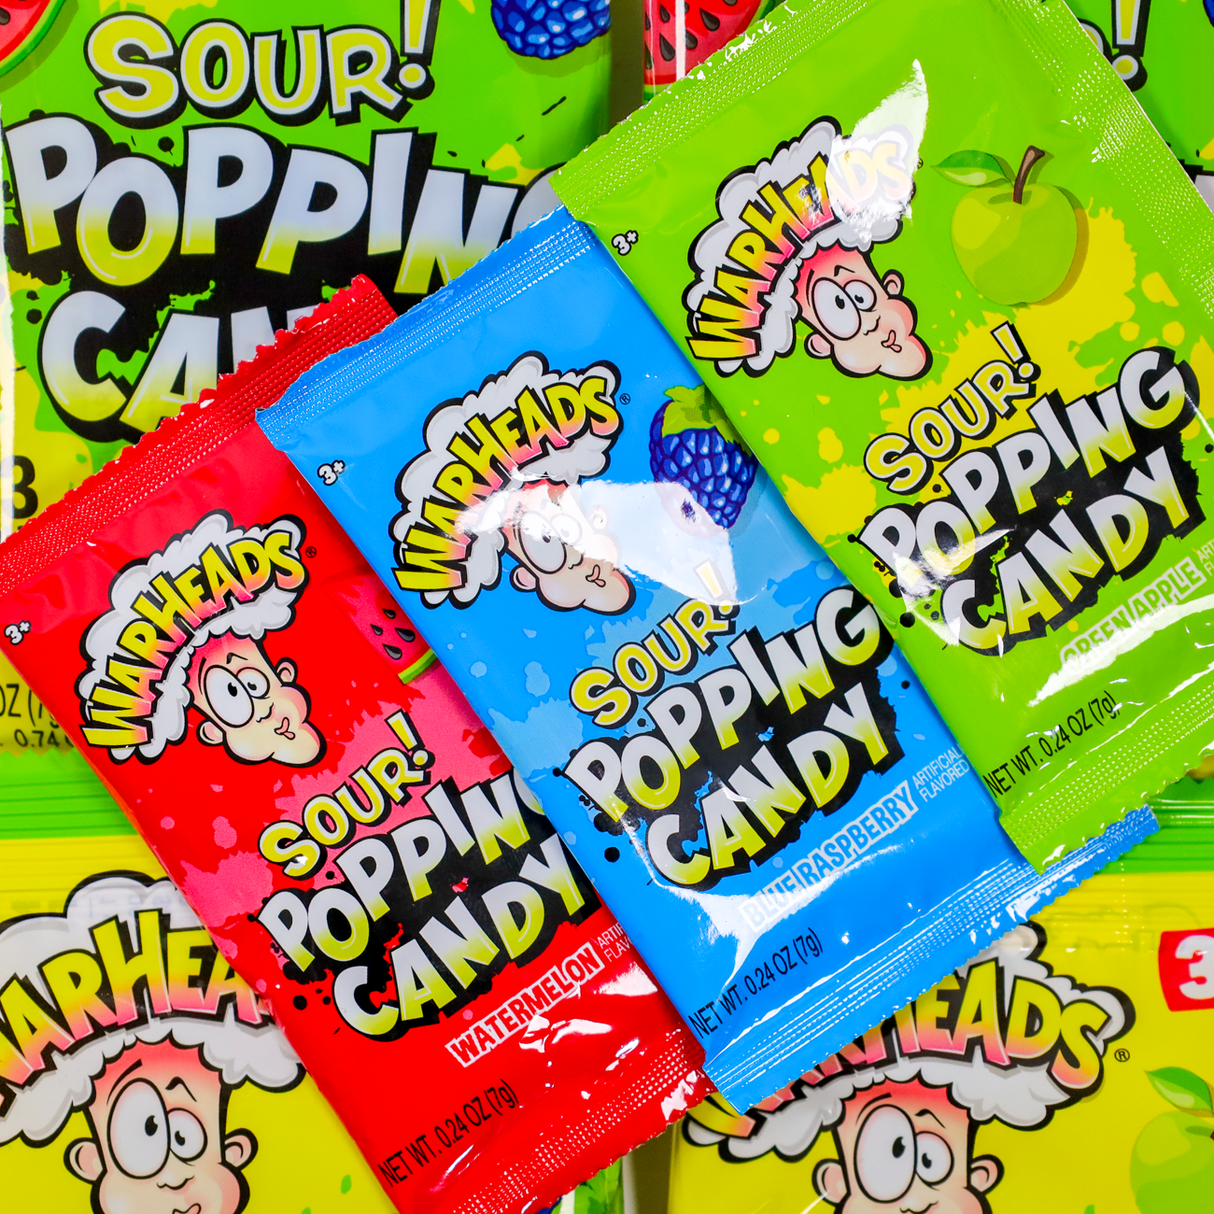 Warheads Sour Popping Candy 21g